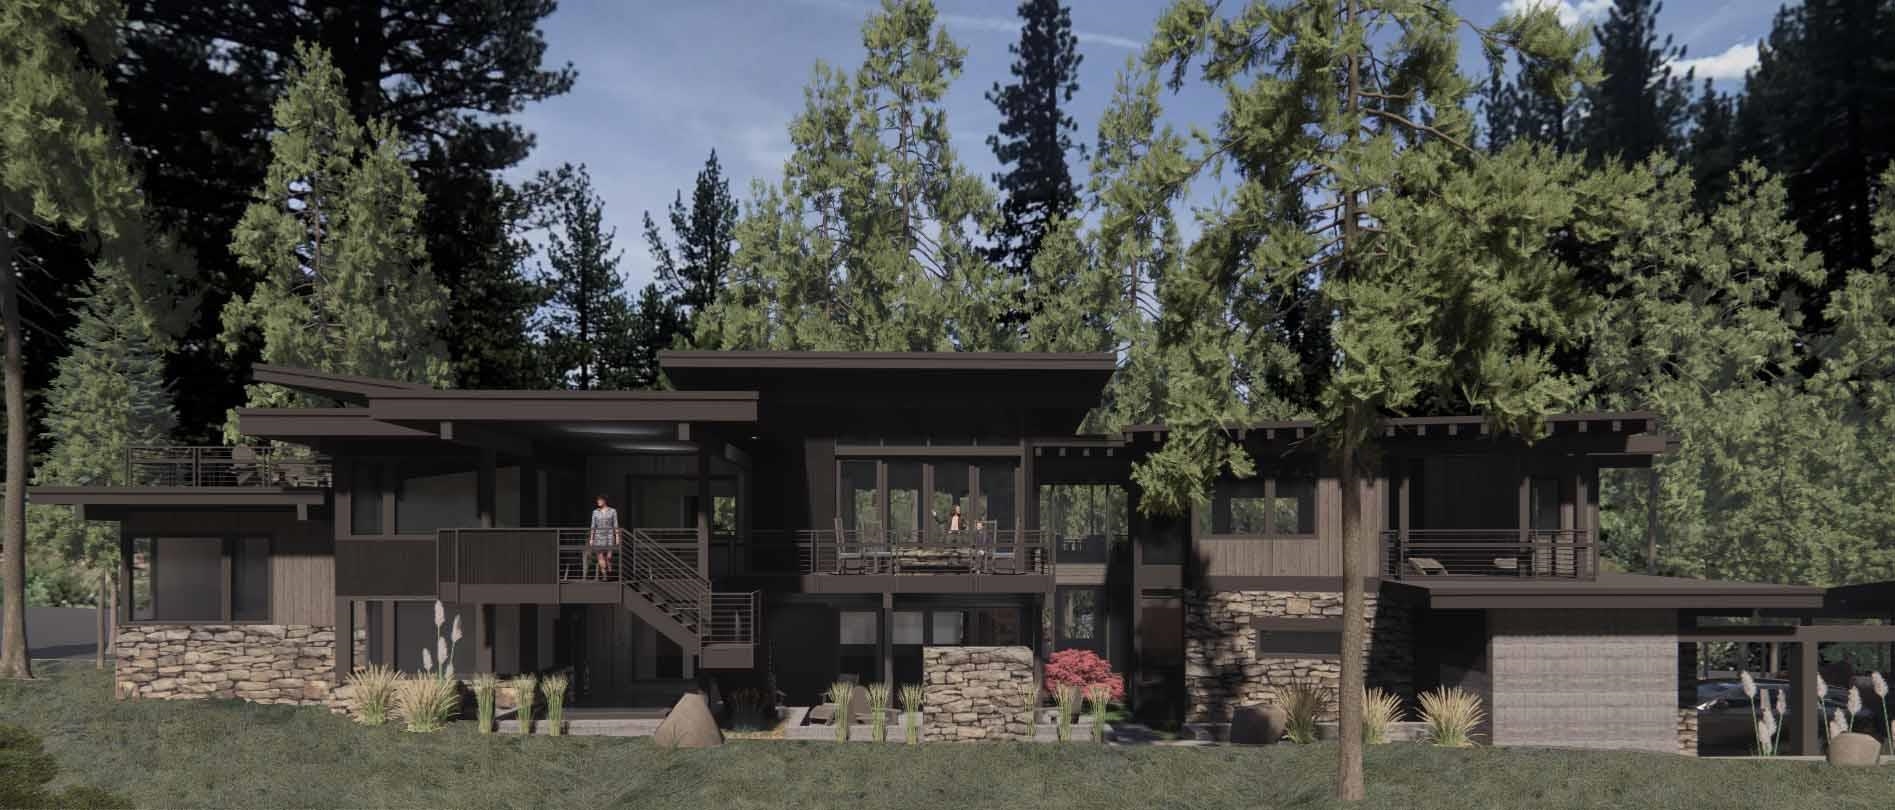 Image for 13260 Snowshoe Thompson, Truckee, CA 96161-0000